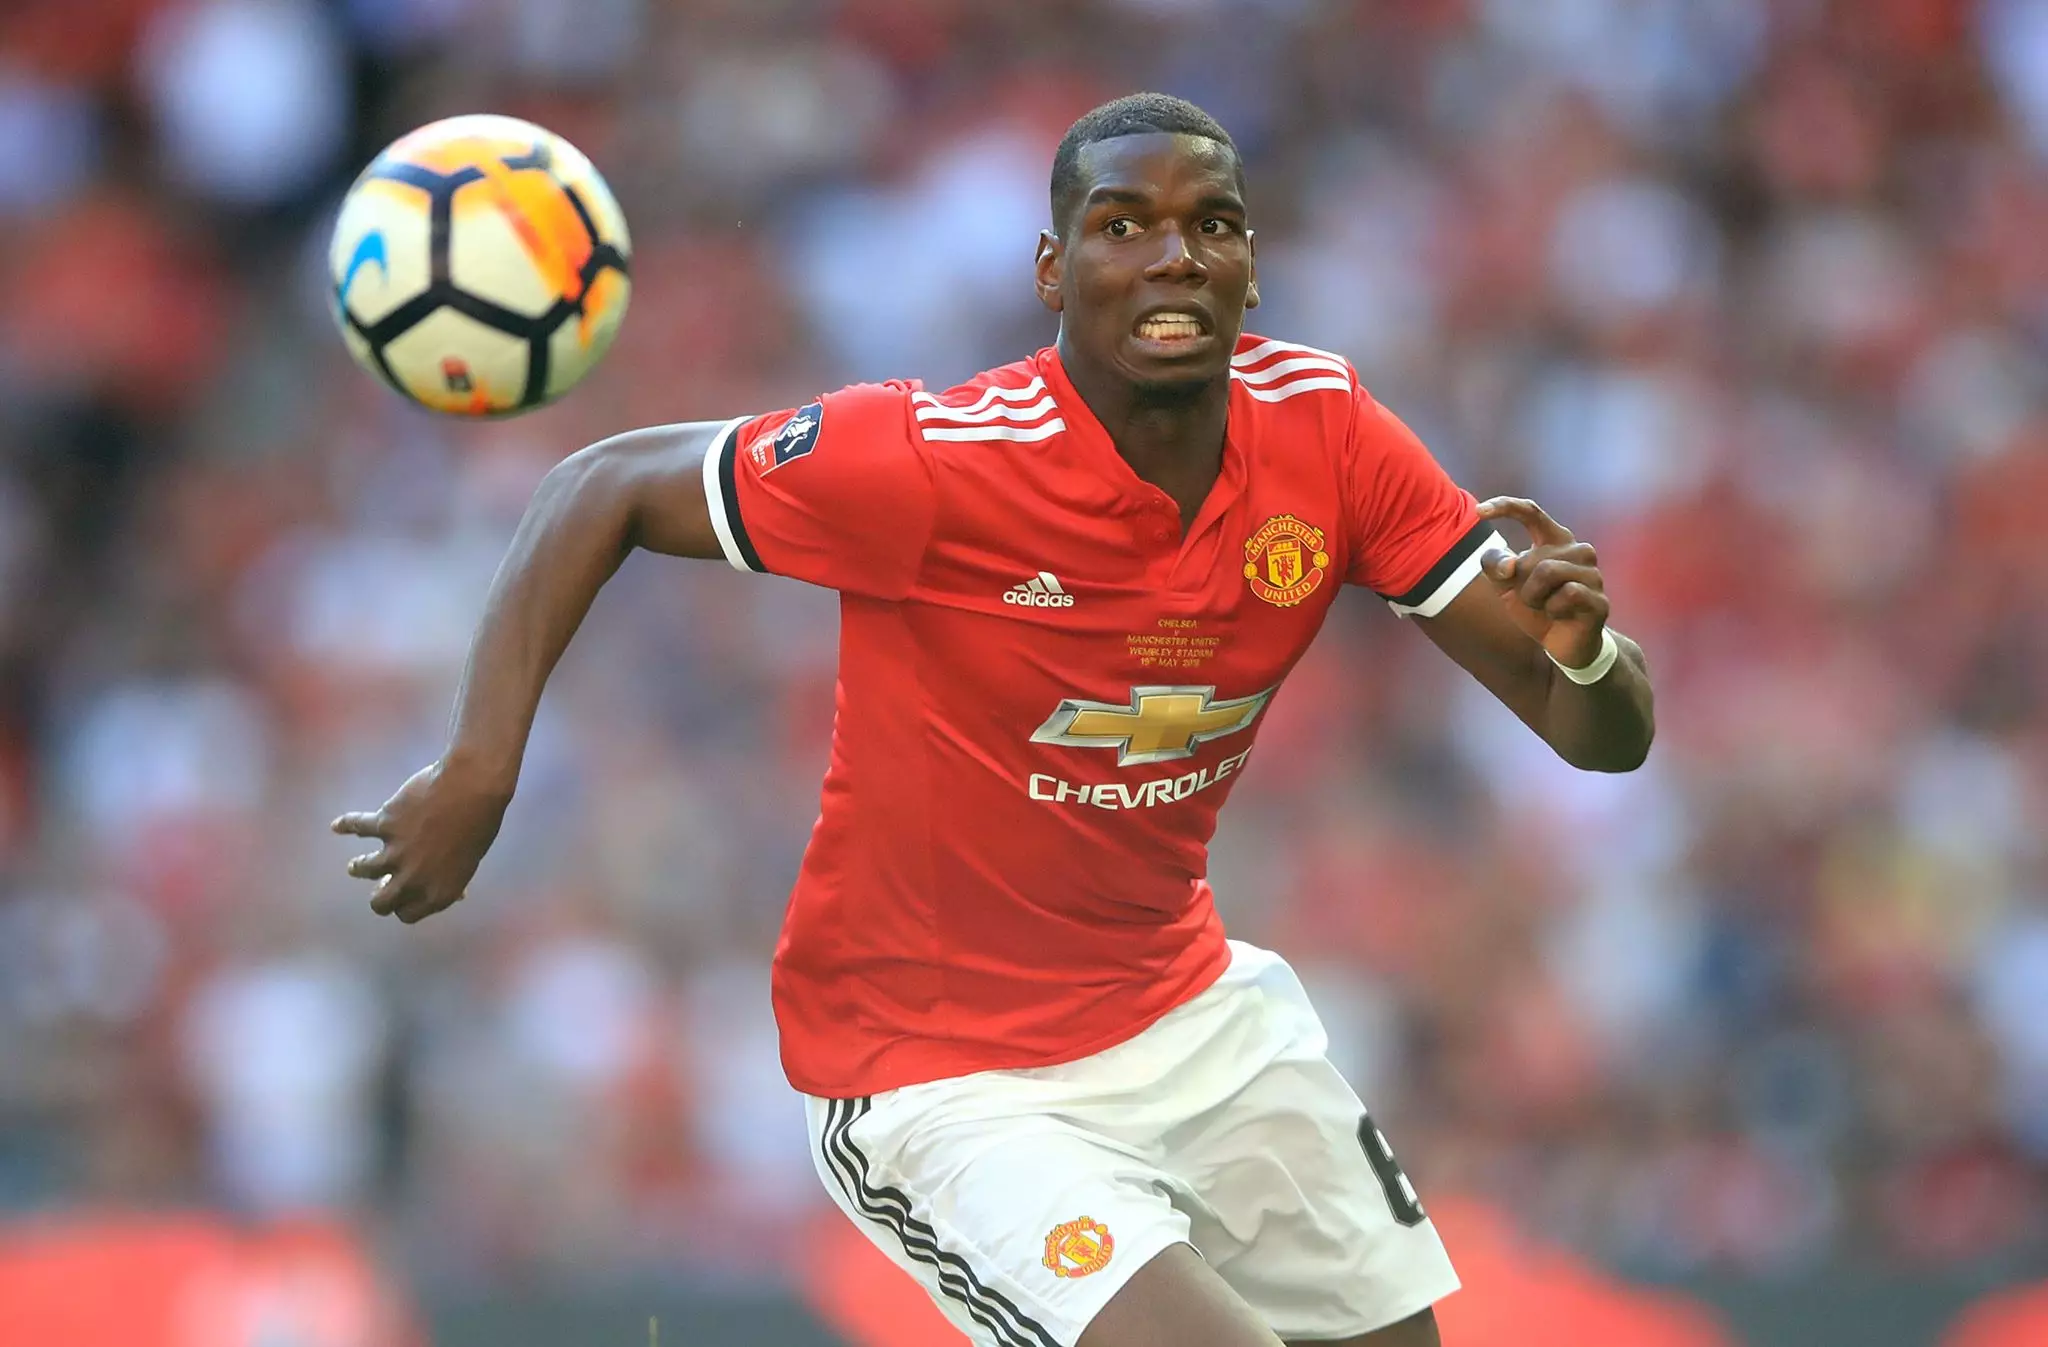 Pogba in action for United. Image: PA